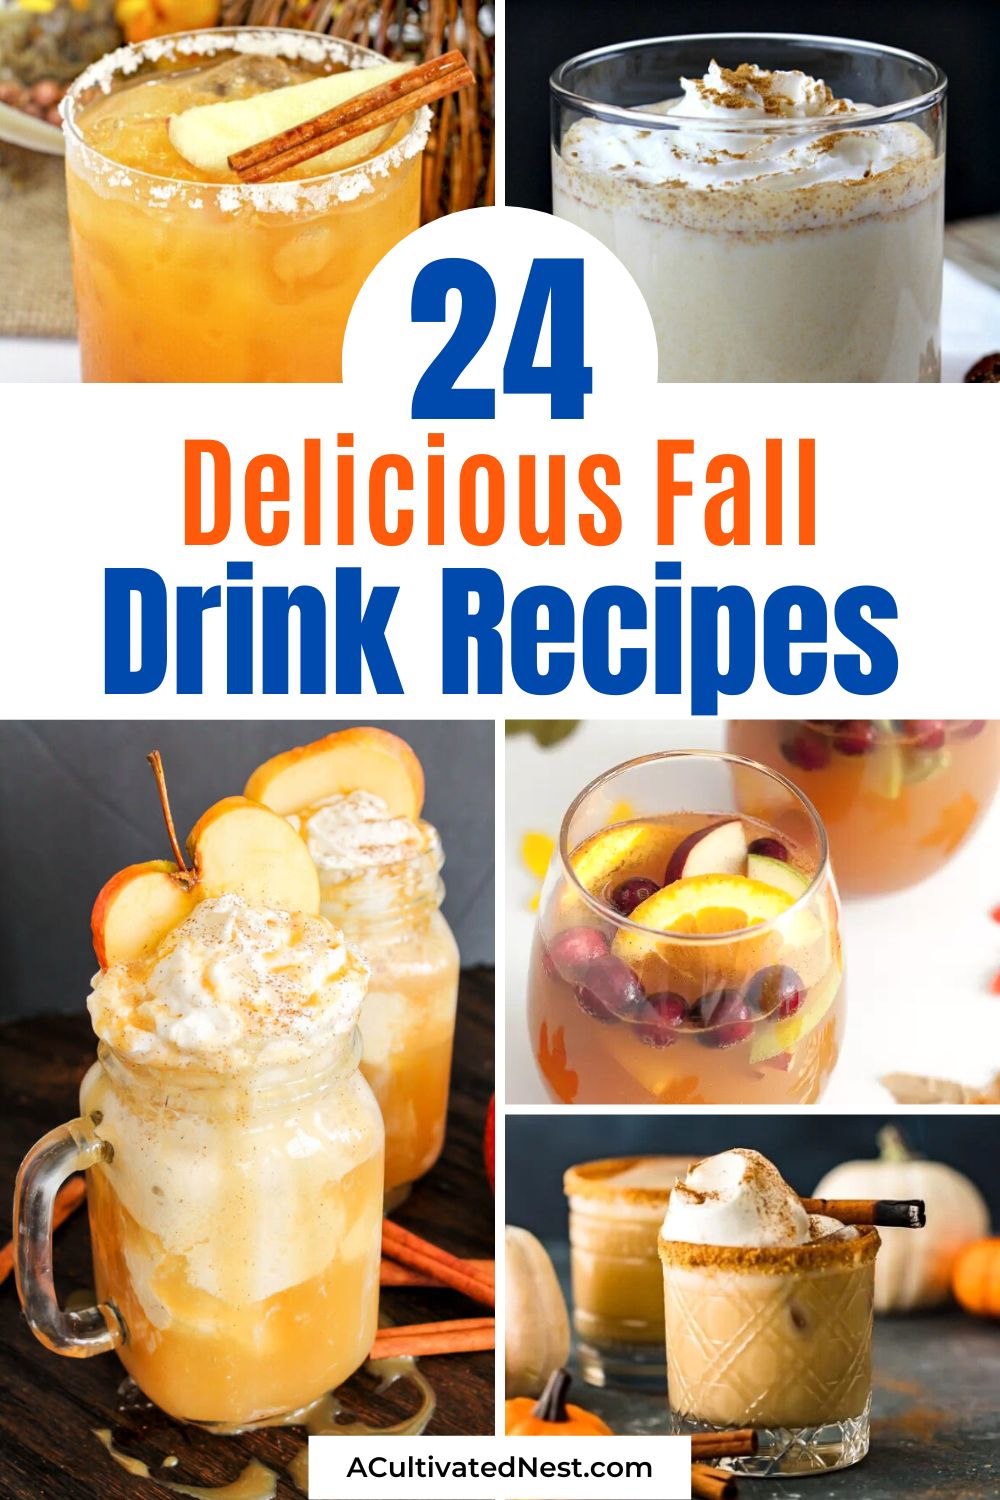 24 Delicious Fall Drink Recipes- A tasty way to celebrate all the wonderful flavors of fall is with some of these delicious fall drink recipes! These are great for autumn parties! | nonalcoholic drinks, alcoholic drinks, #drinkRecipes #drinks #fall #fallRecipes #ACultivatedNest